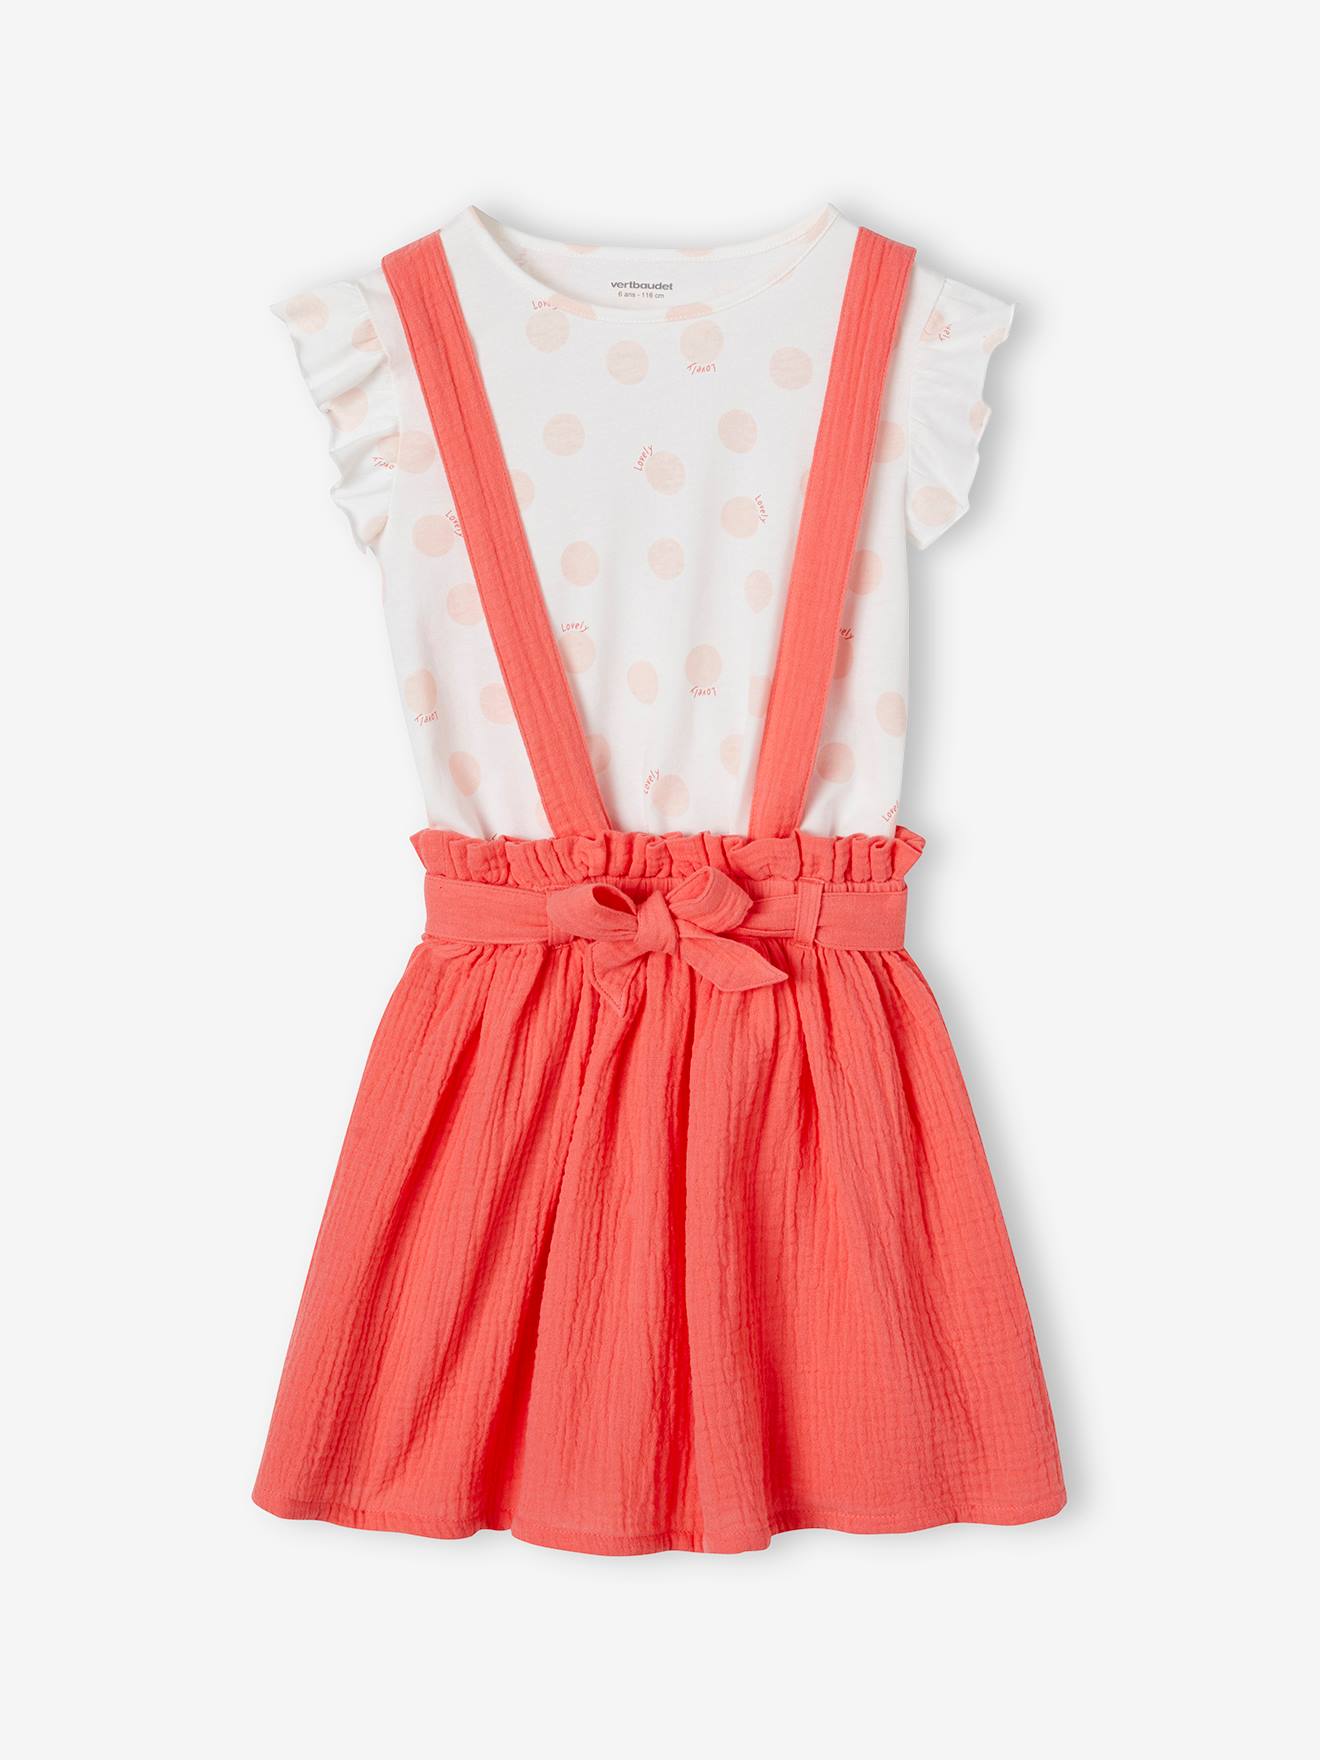 Striped T-Shirt + Cotton Gauze Skirt Outfit, for Girls coral